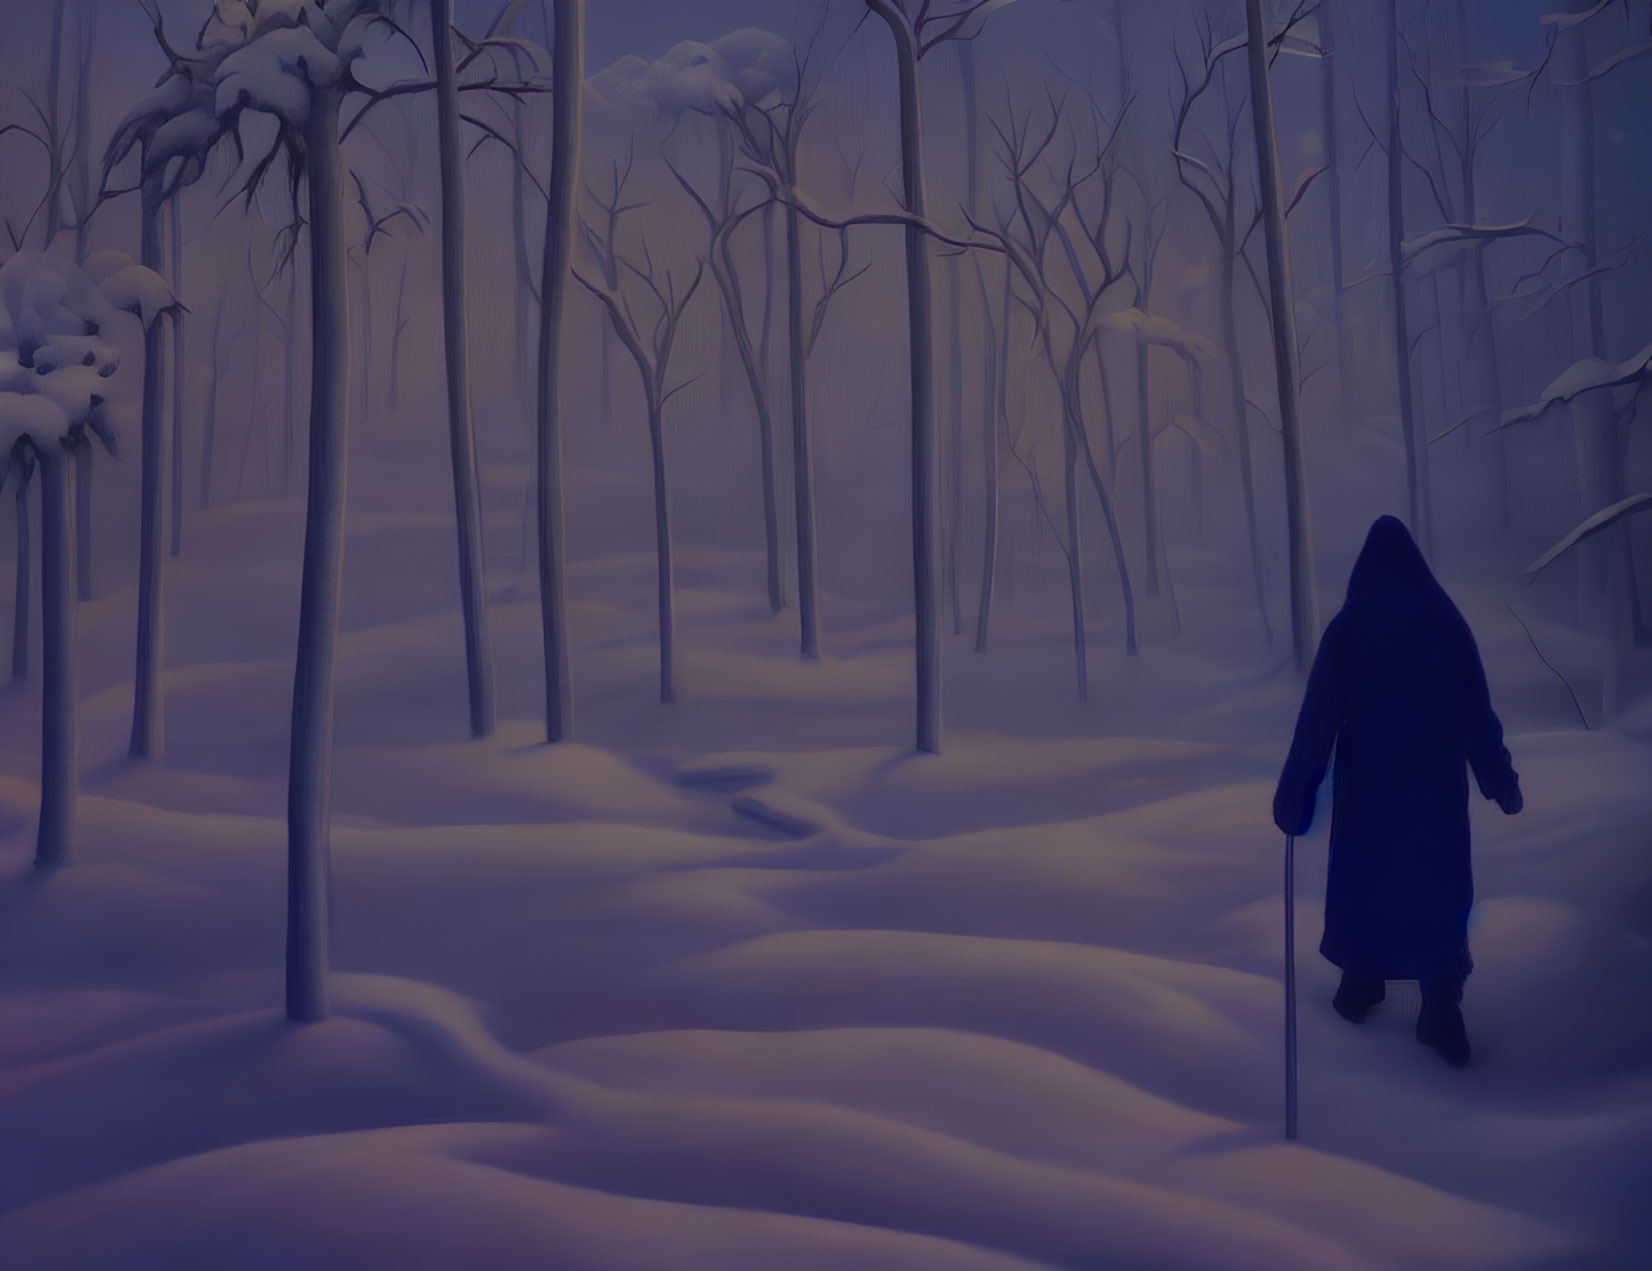 Solitary figure in cloak walking through snow-covered forest